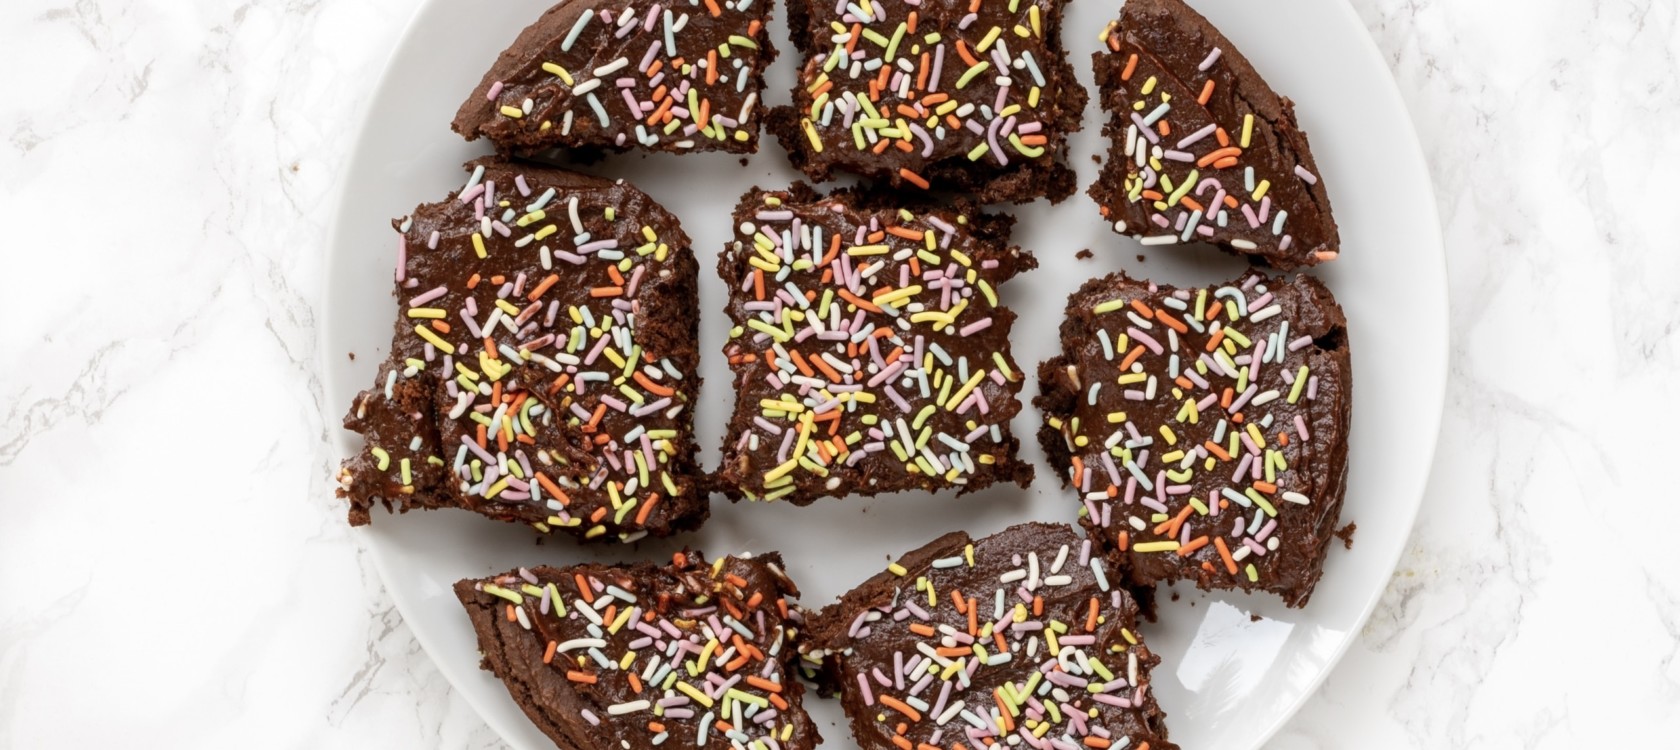 Chocolate Frosted Vegan Brownies